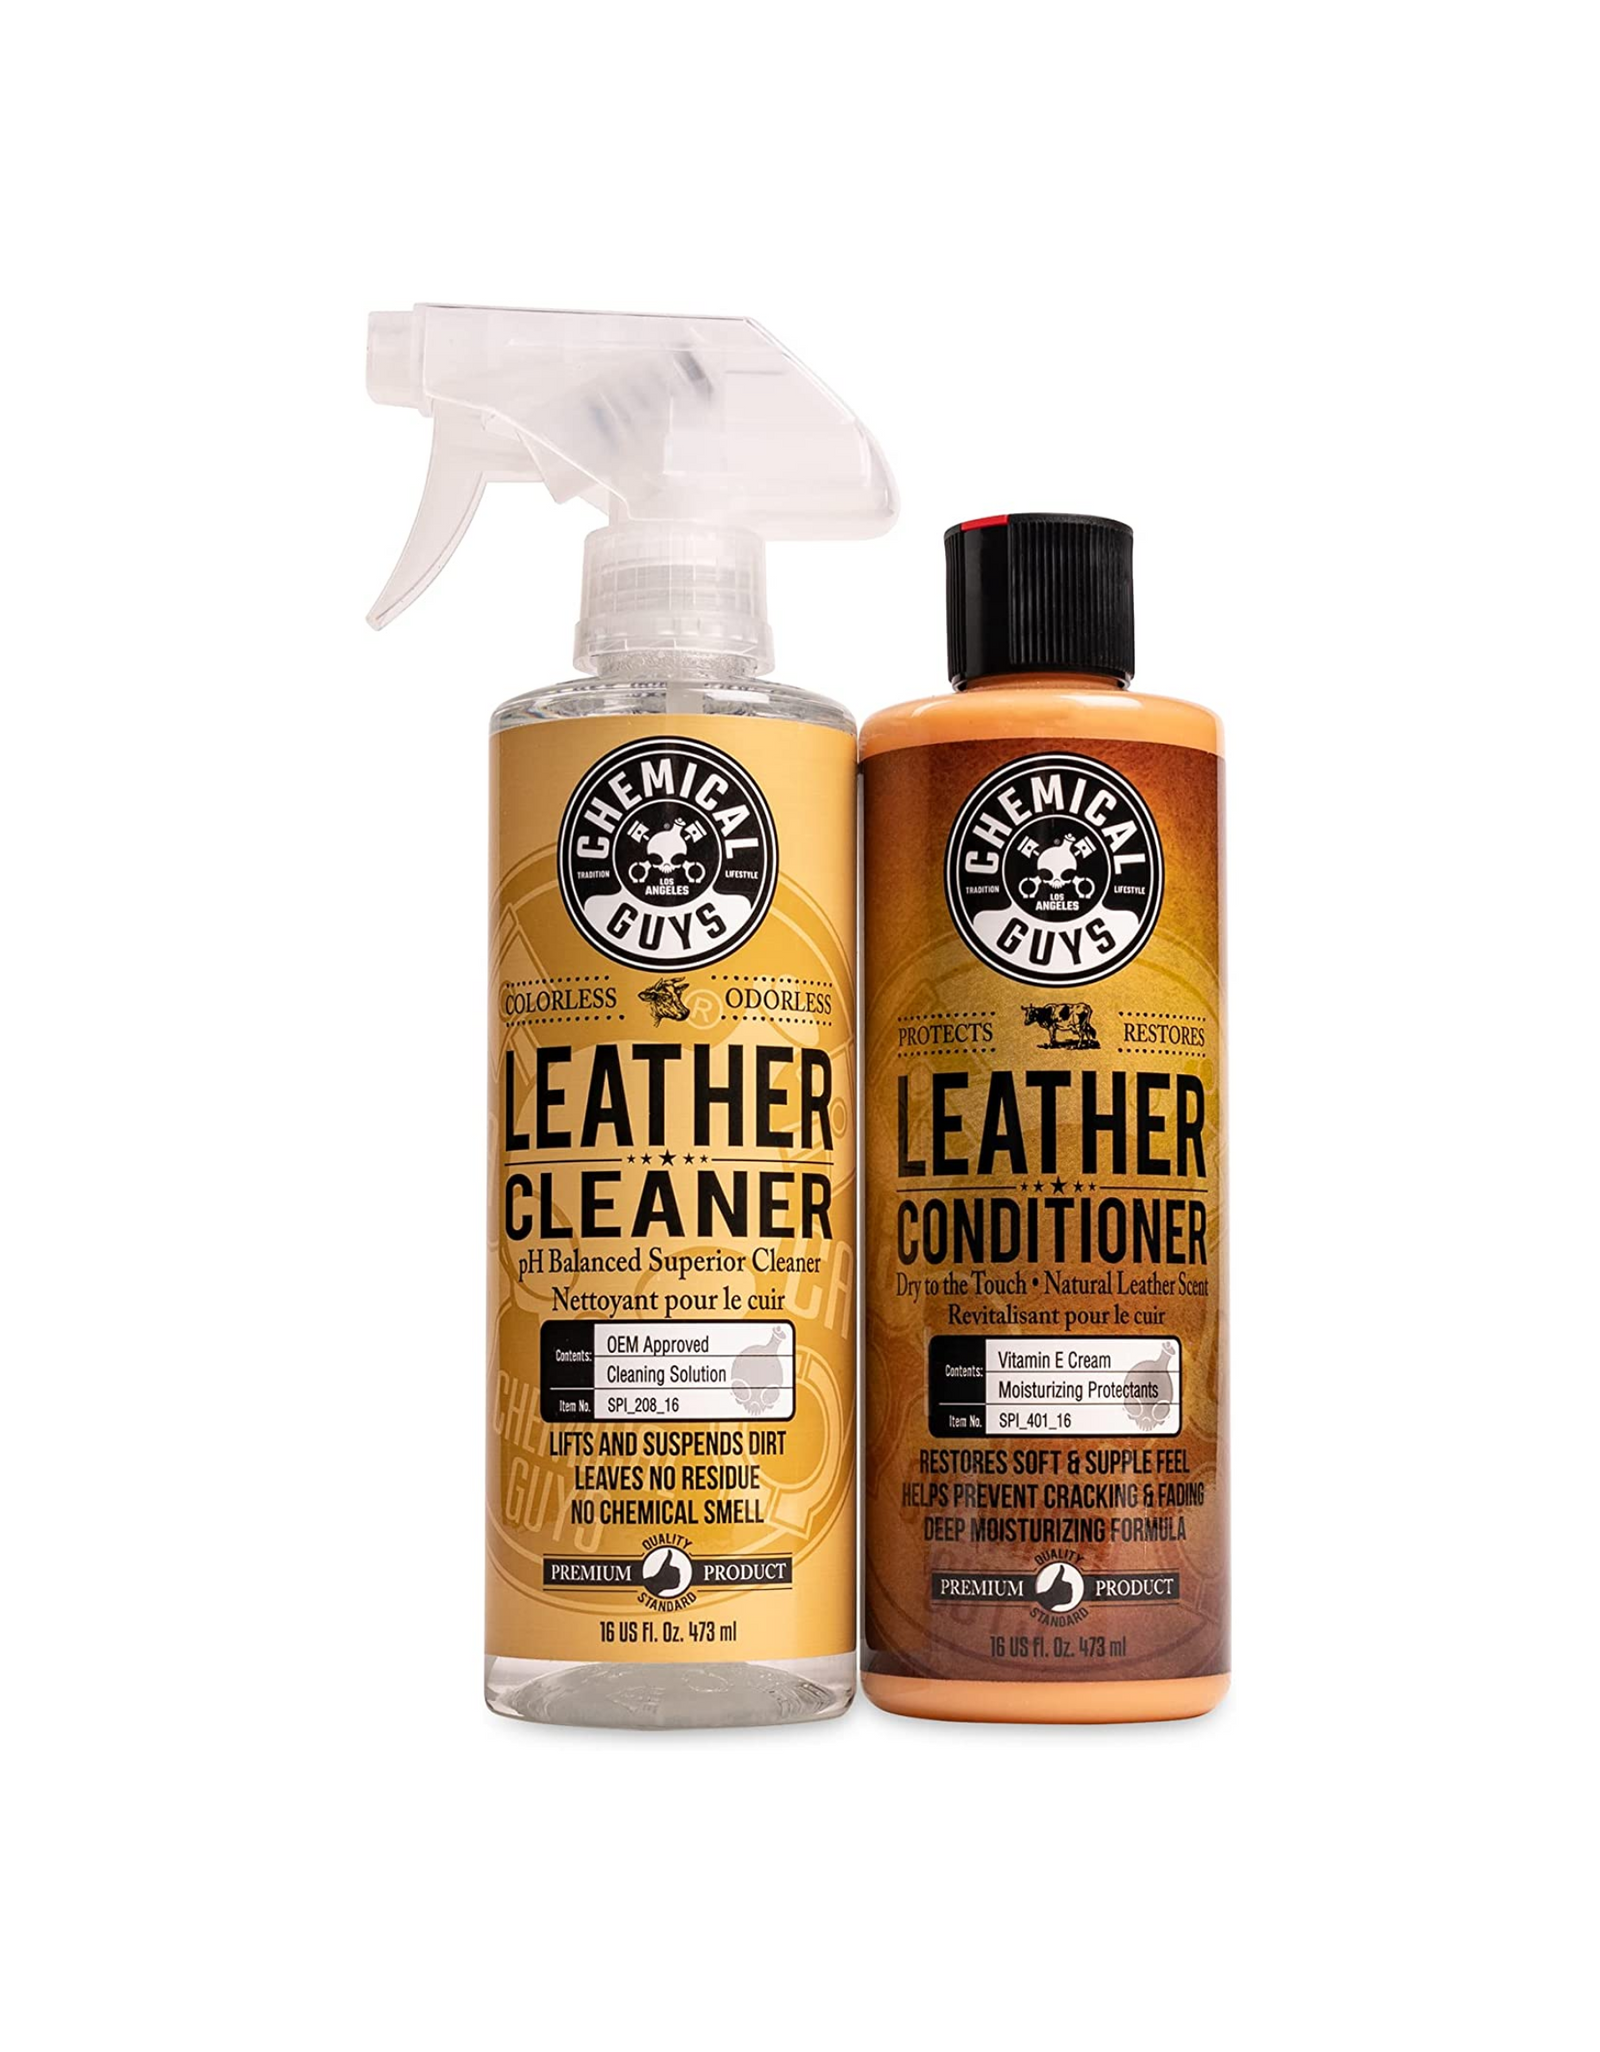 Chemical Guys SPI_109_16 Leather Cleaner and Leather Conditioner Kit, 16 fl oz Bottles (pack of 2)